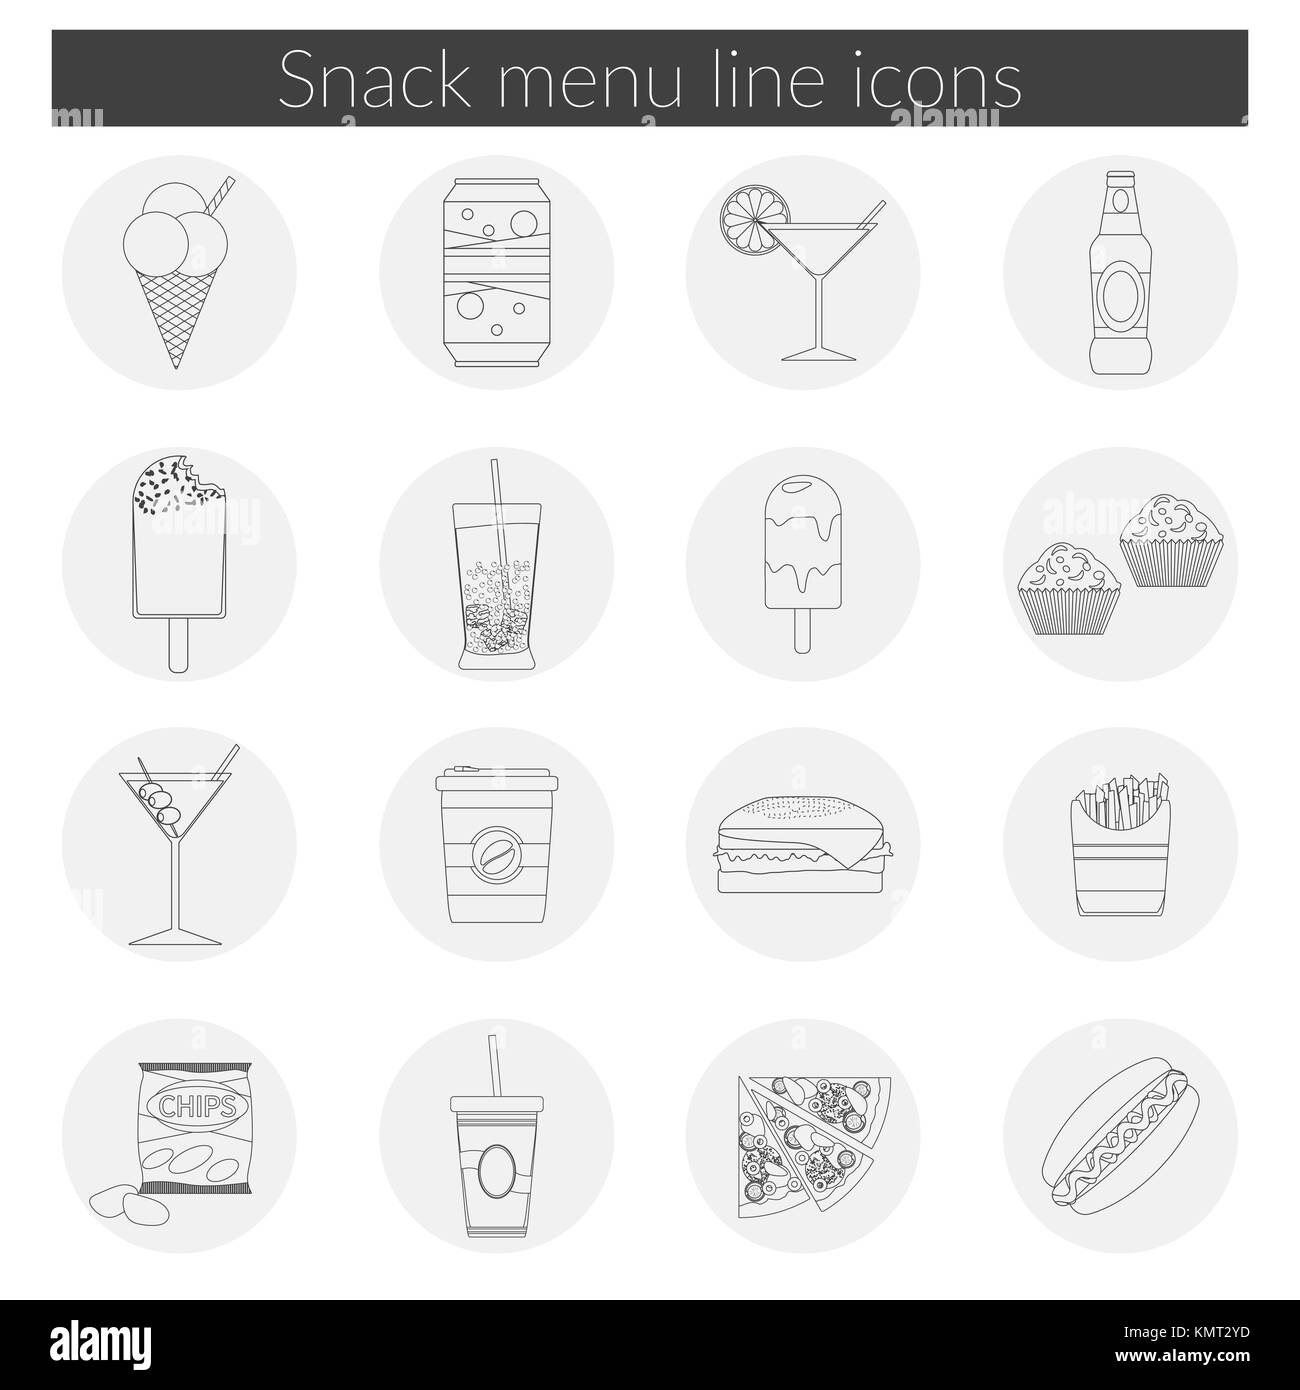 Snack Menu line icons set vector illustration of food, drink, coffee, hamburger, pizza, beer, cocktail, fastfood, cola, ice cream, potato chips, candy Stock Vector